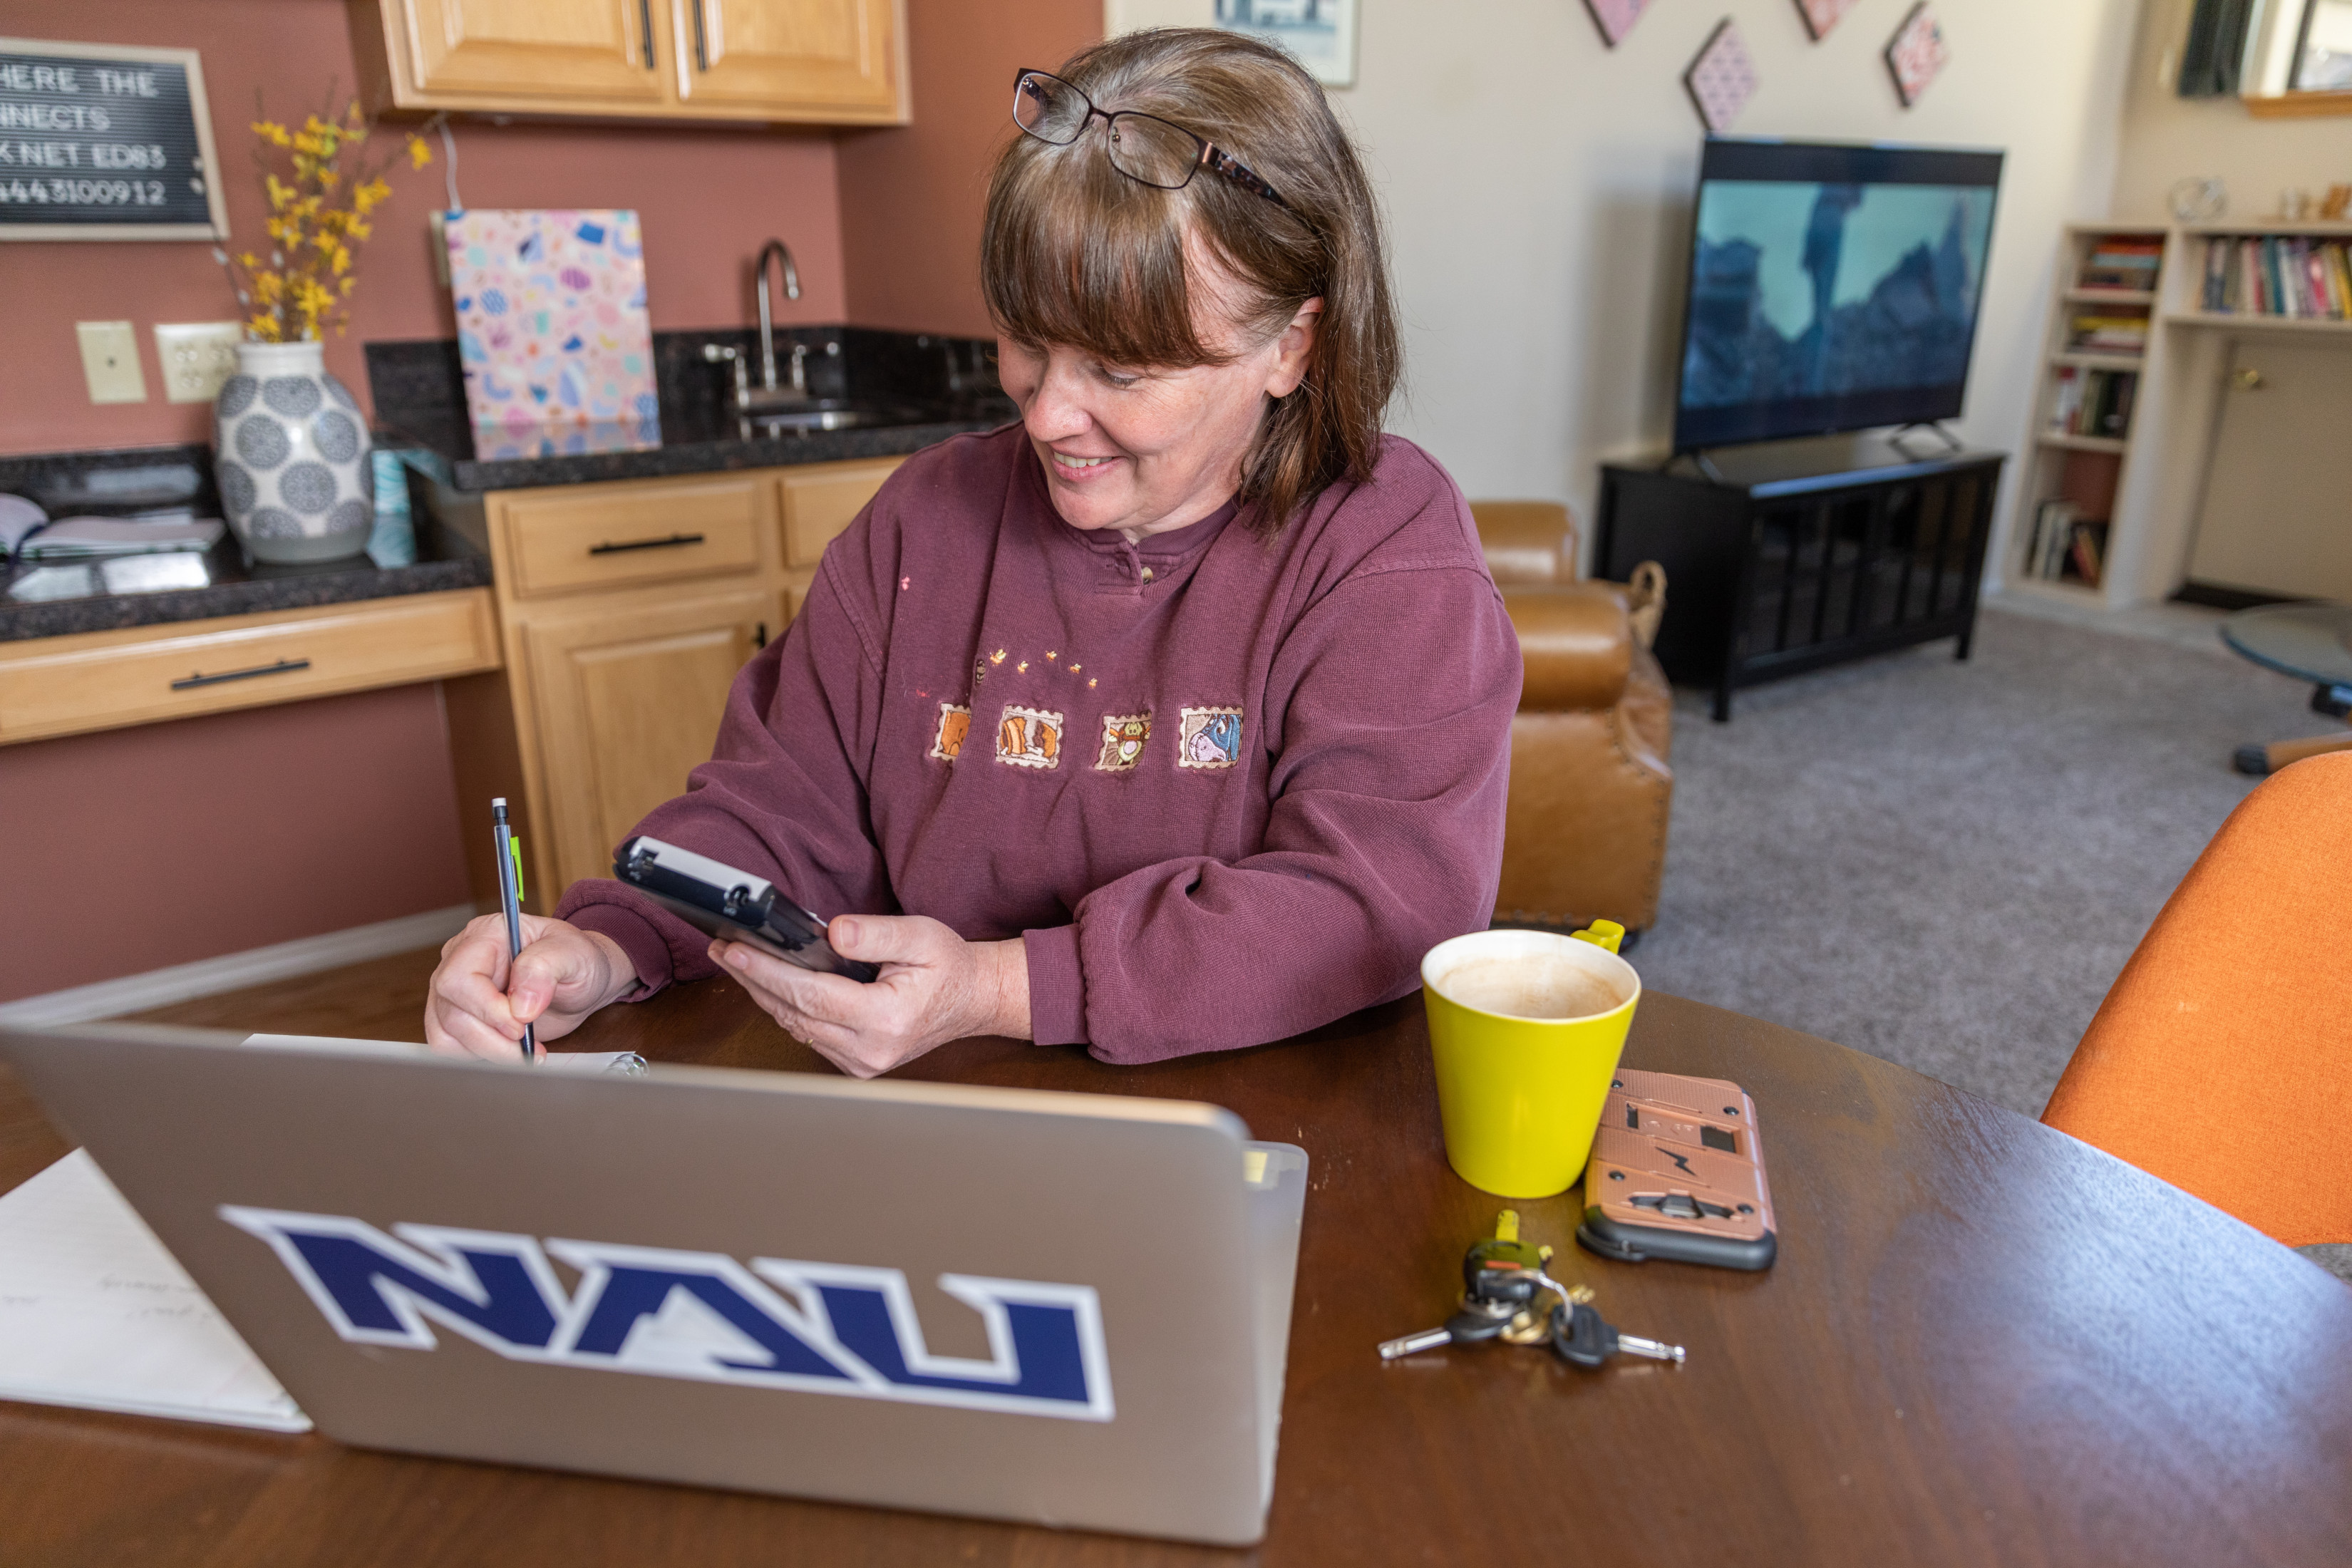 An online student works on their laptop and calculator in their kitchen.